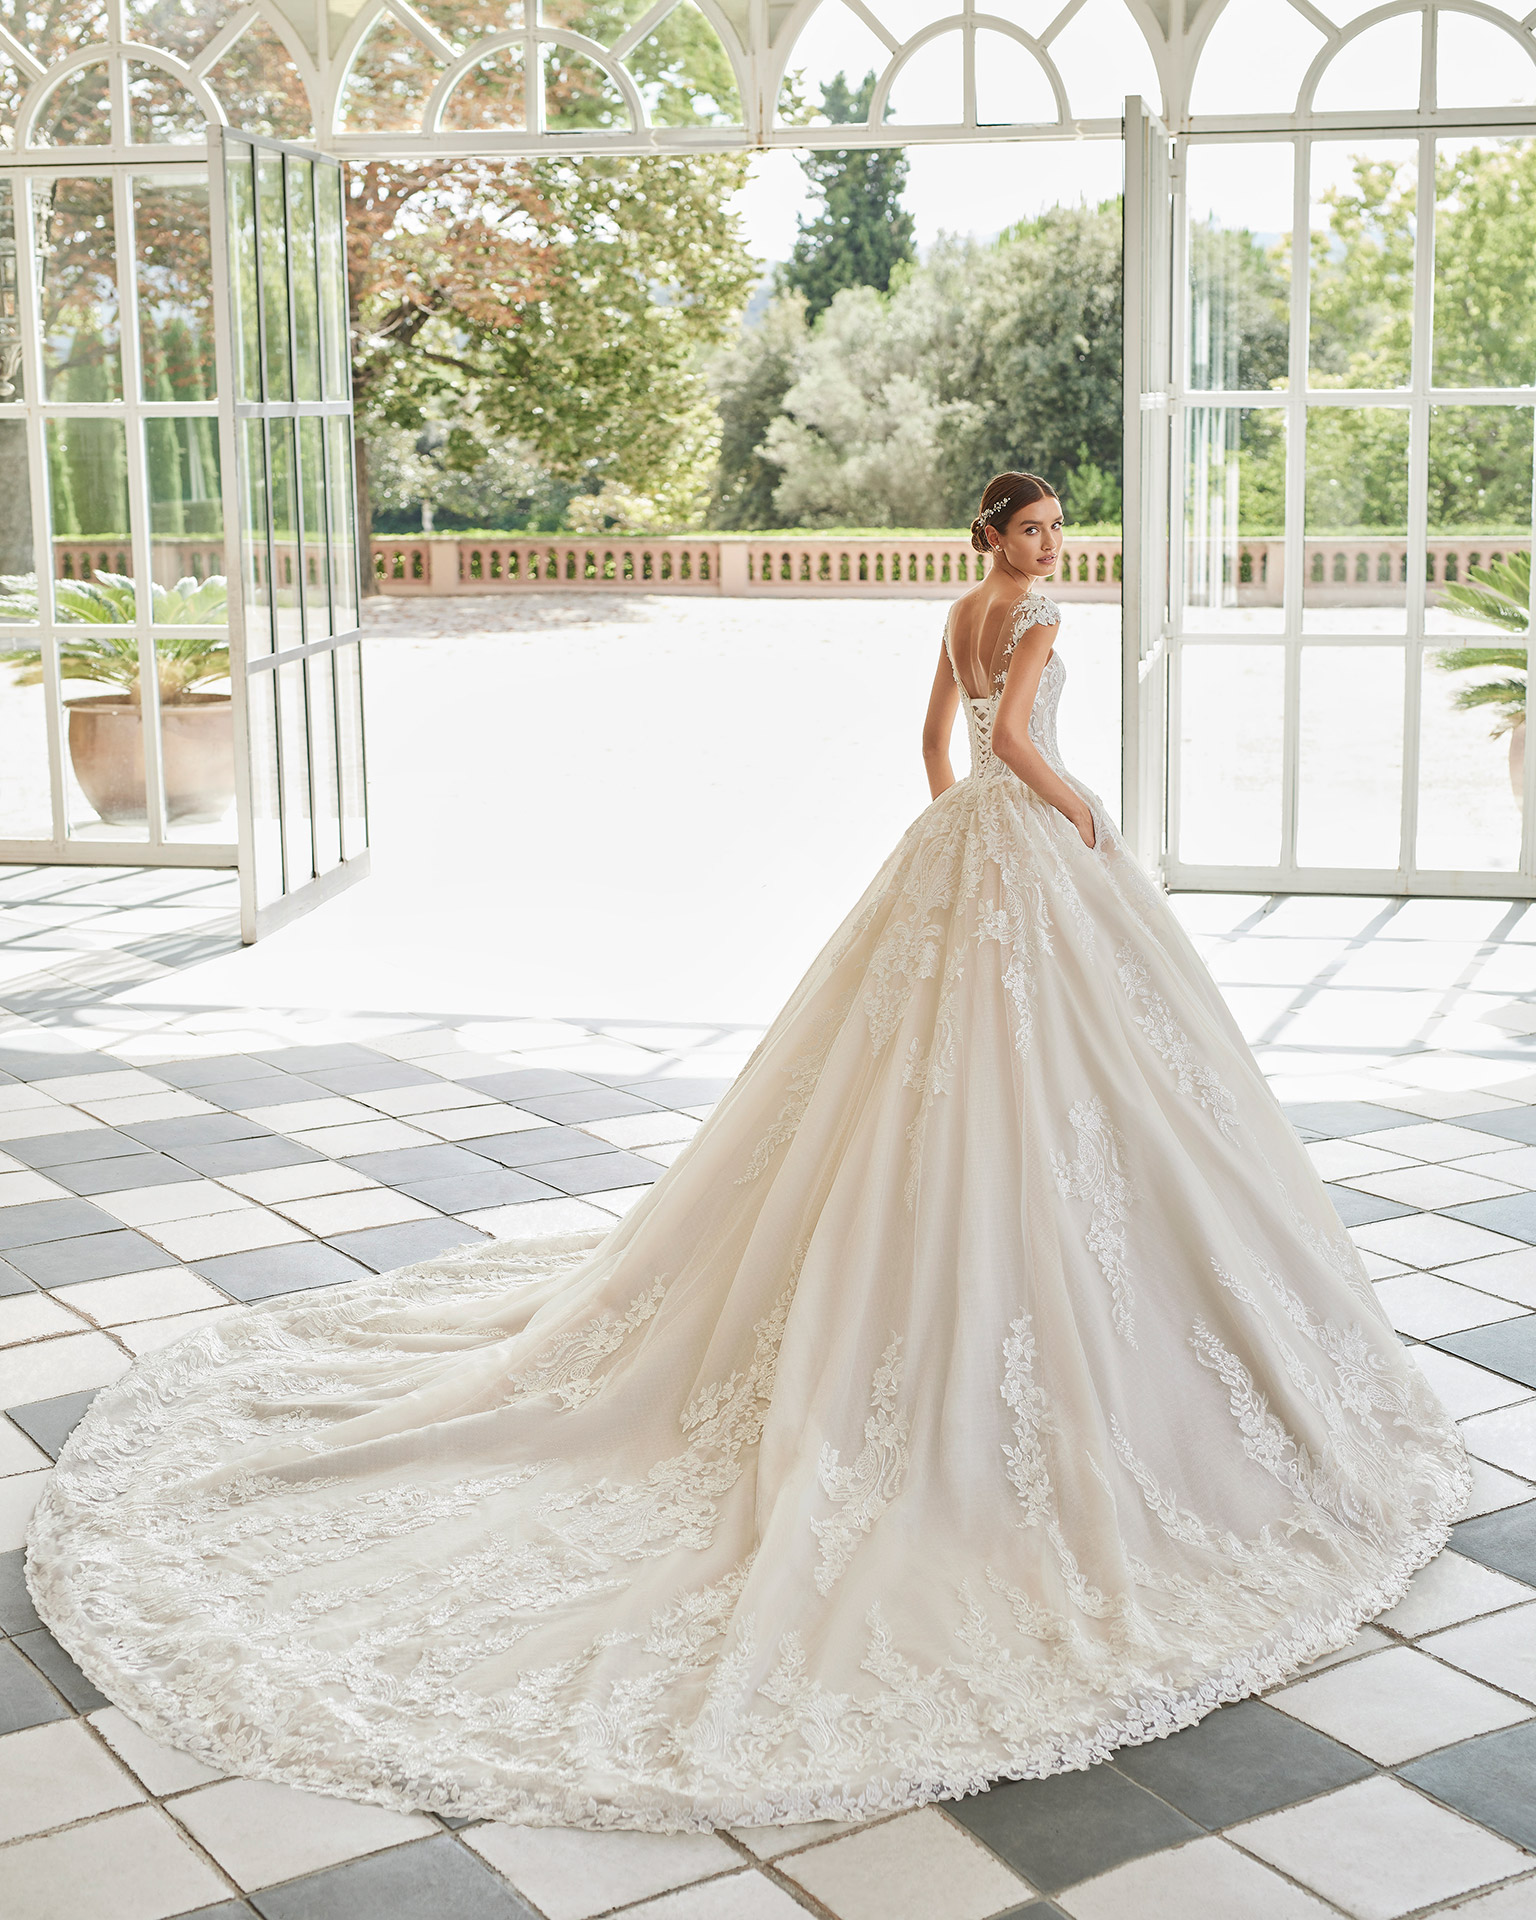 Romantic princess-style wedding dress, with a sheath-style skirt with pockets; with an illusion neckline, and a corset back. Luna Studio dress made of tulle and lace, with beadwork finishes. LUNA_NOVIAS.